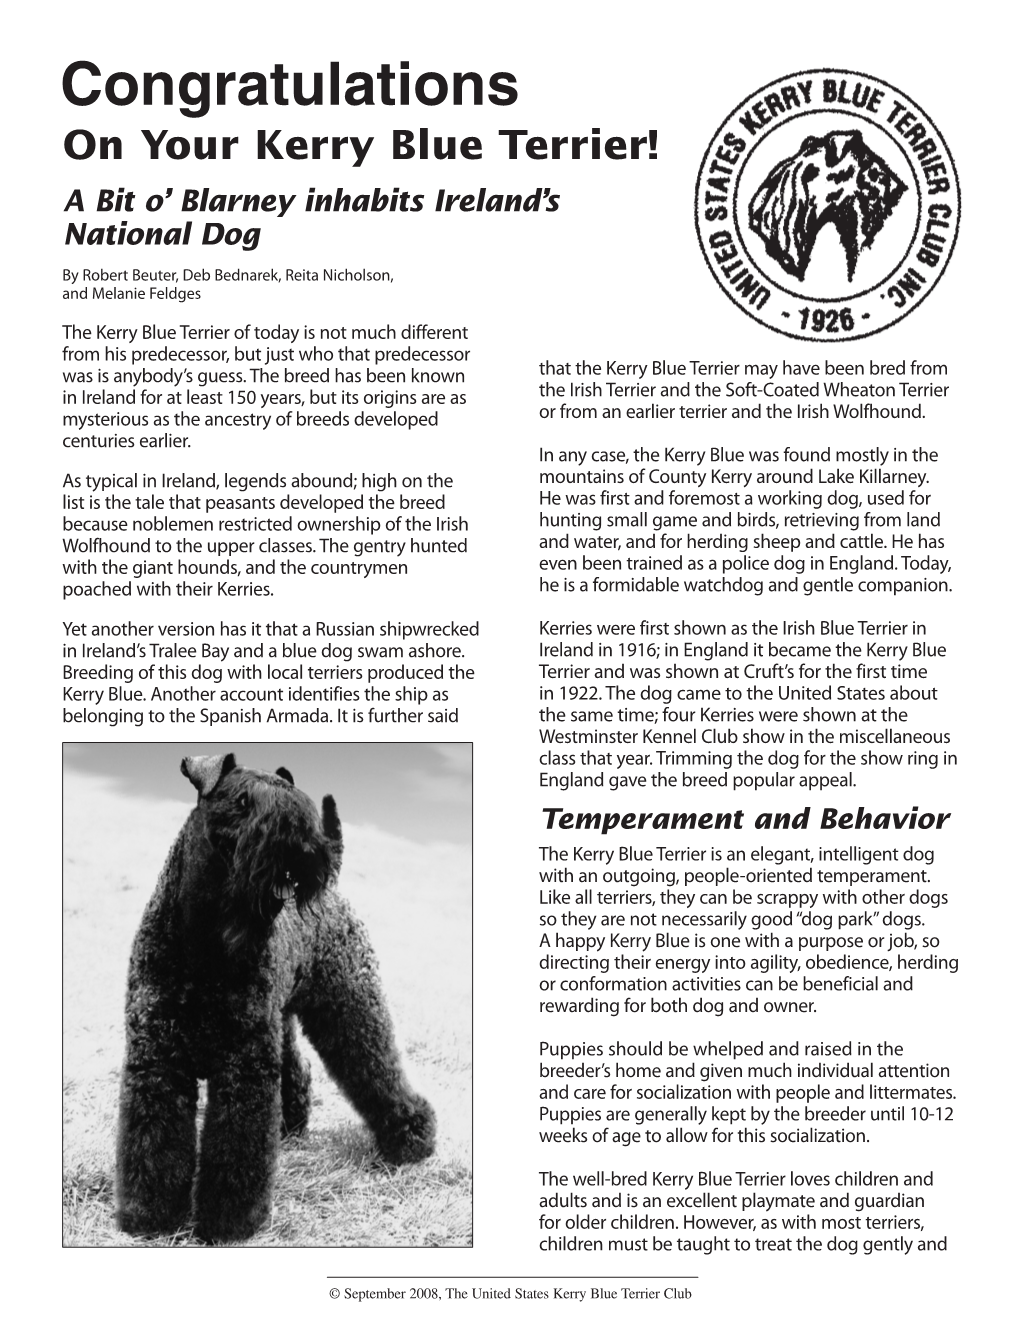 Congratulations on Your Kerry Blue Terrier! a Bit O’ Blarney Inhabits Ireland’S National Dog